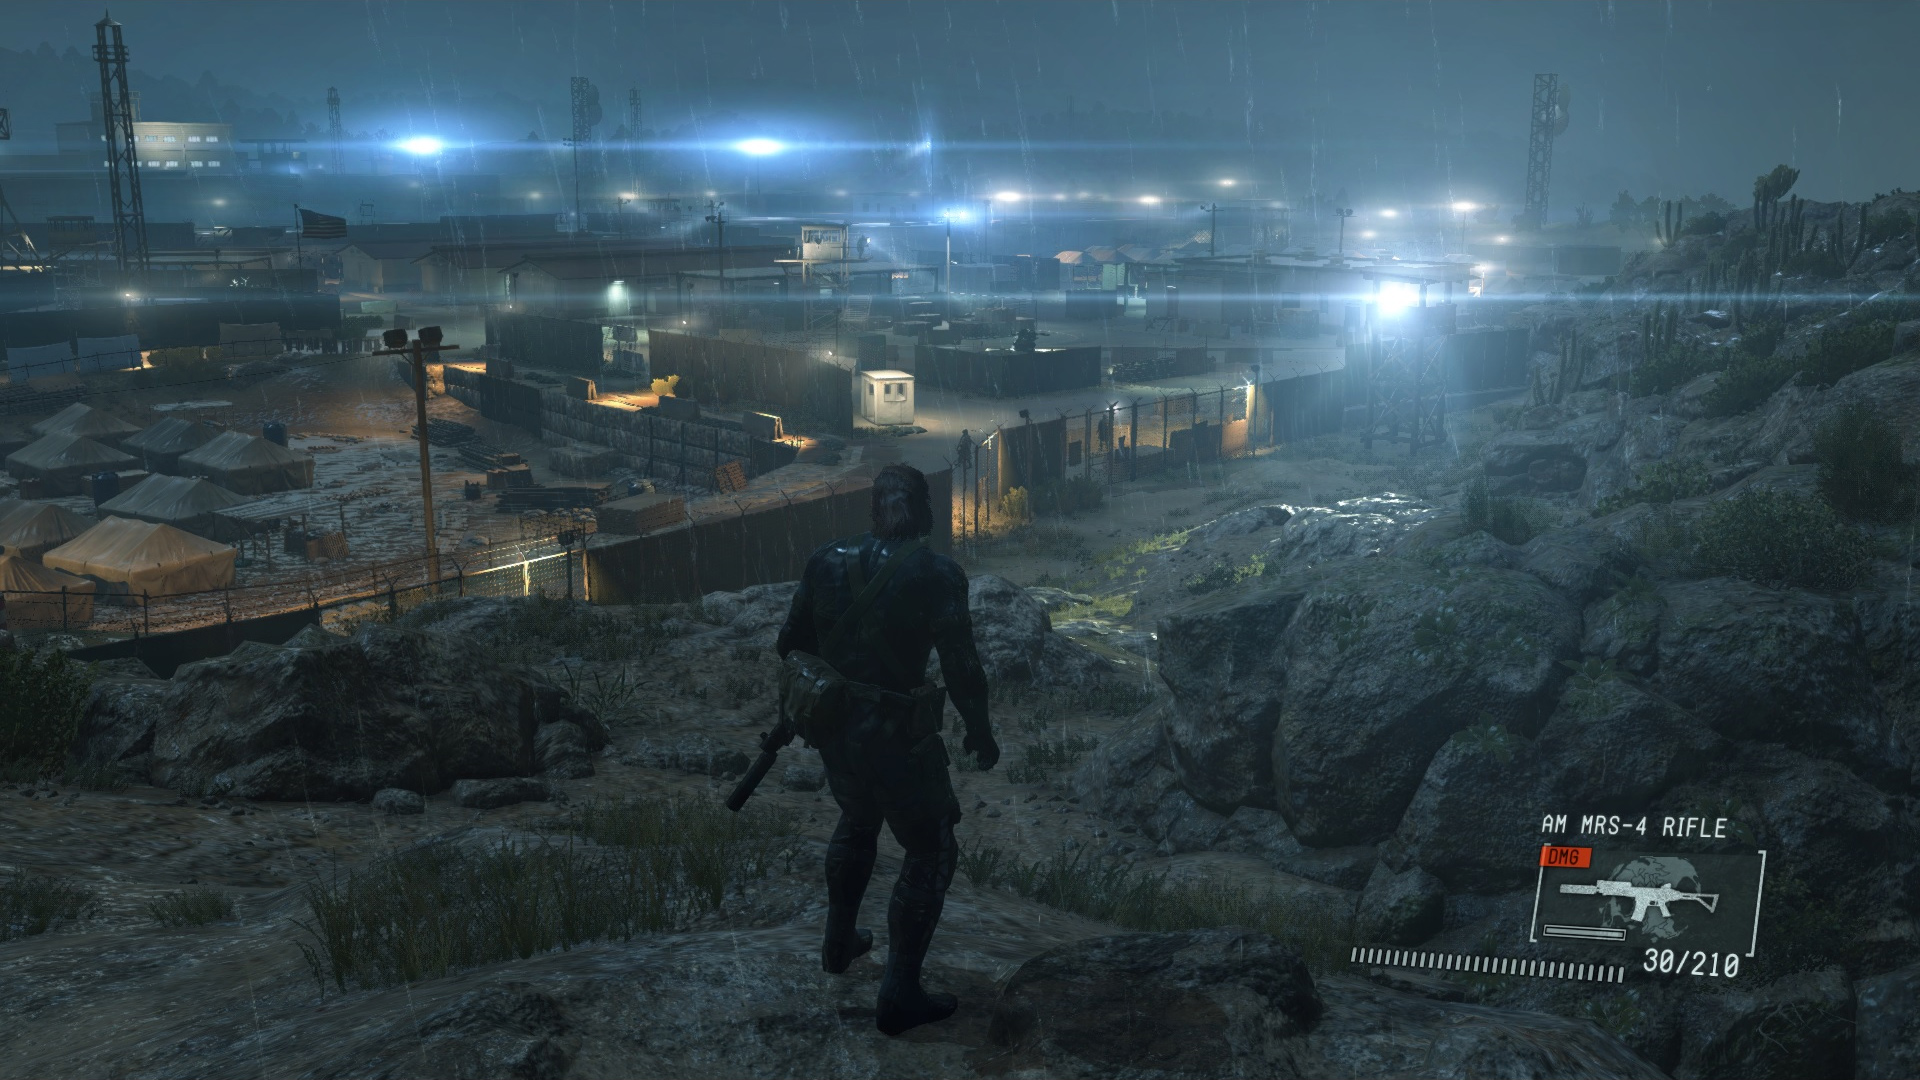 Media asset in full size related to 3dfxzone.it news item entitled as follows: Requisiti hardware e screenshots di Gear Solid V: Ground Zeroes per PC | Image Name: news21890_metal-gear-solid-v-ground-zeroes-pc-screenshot_1.jpg